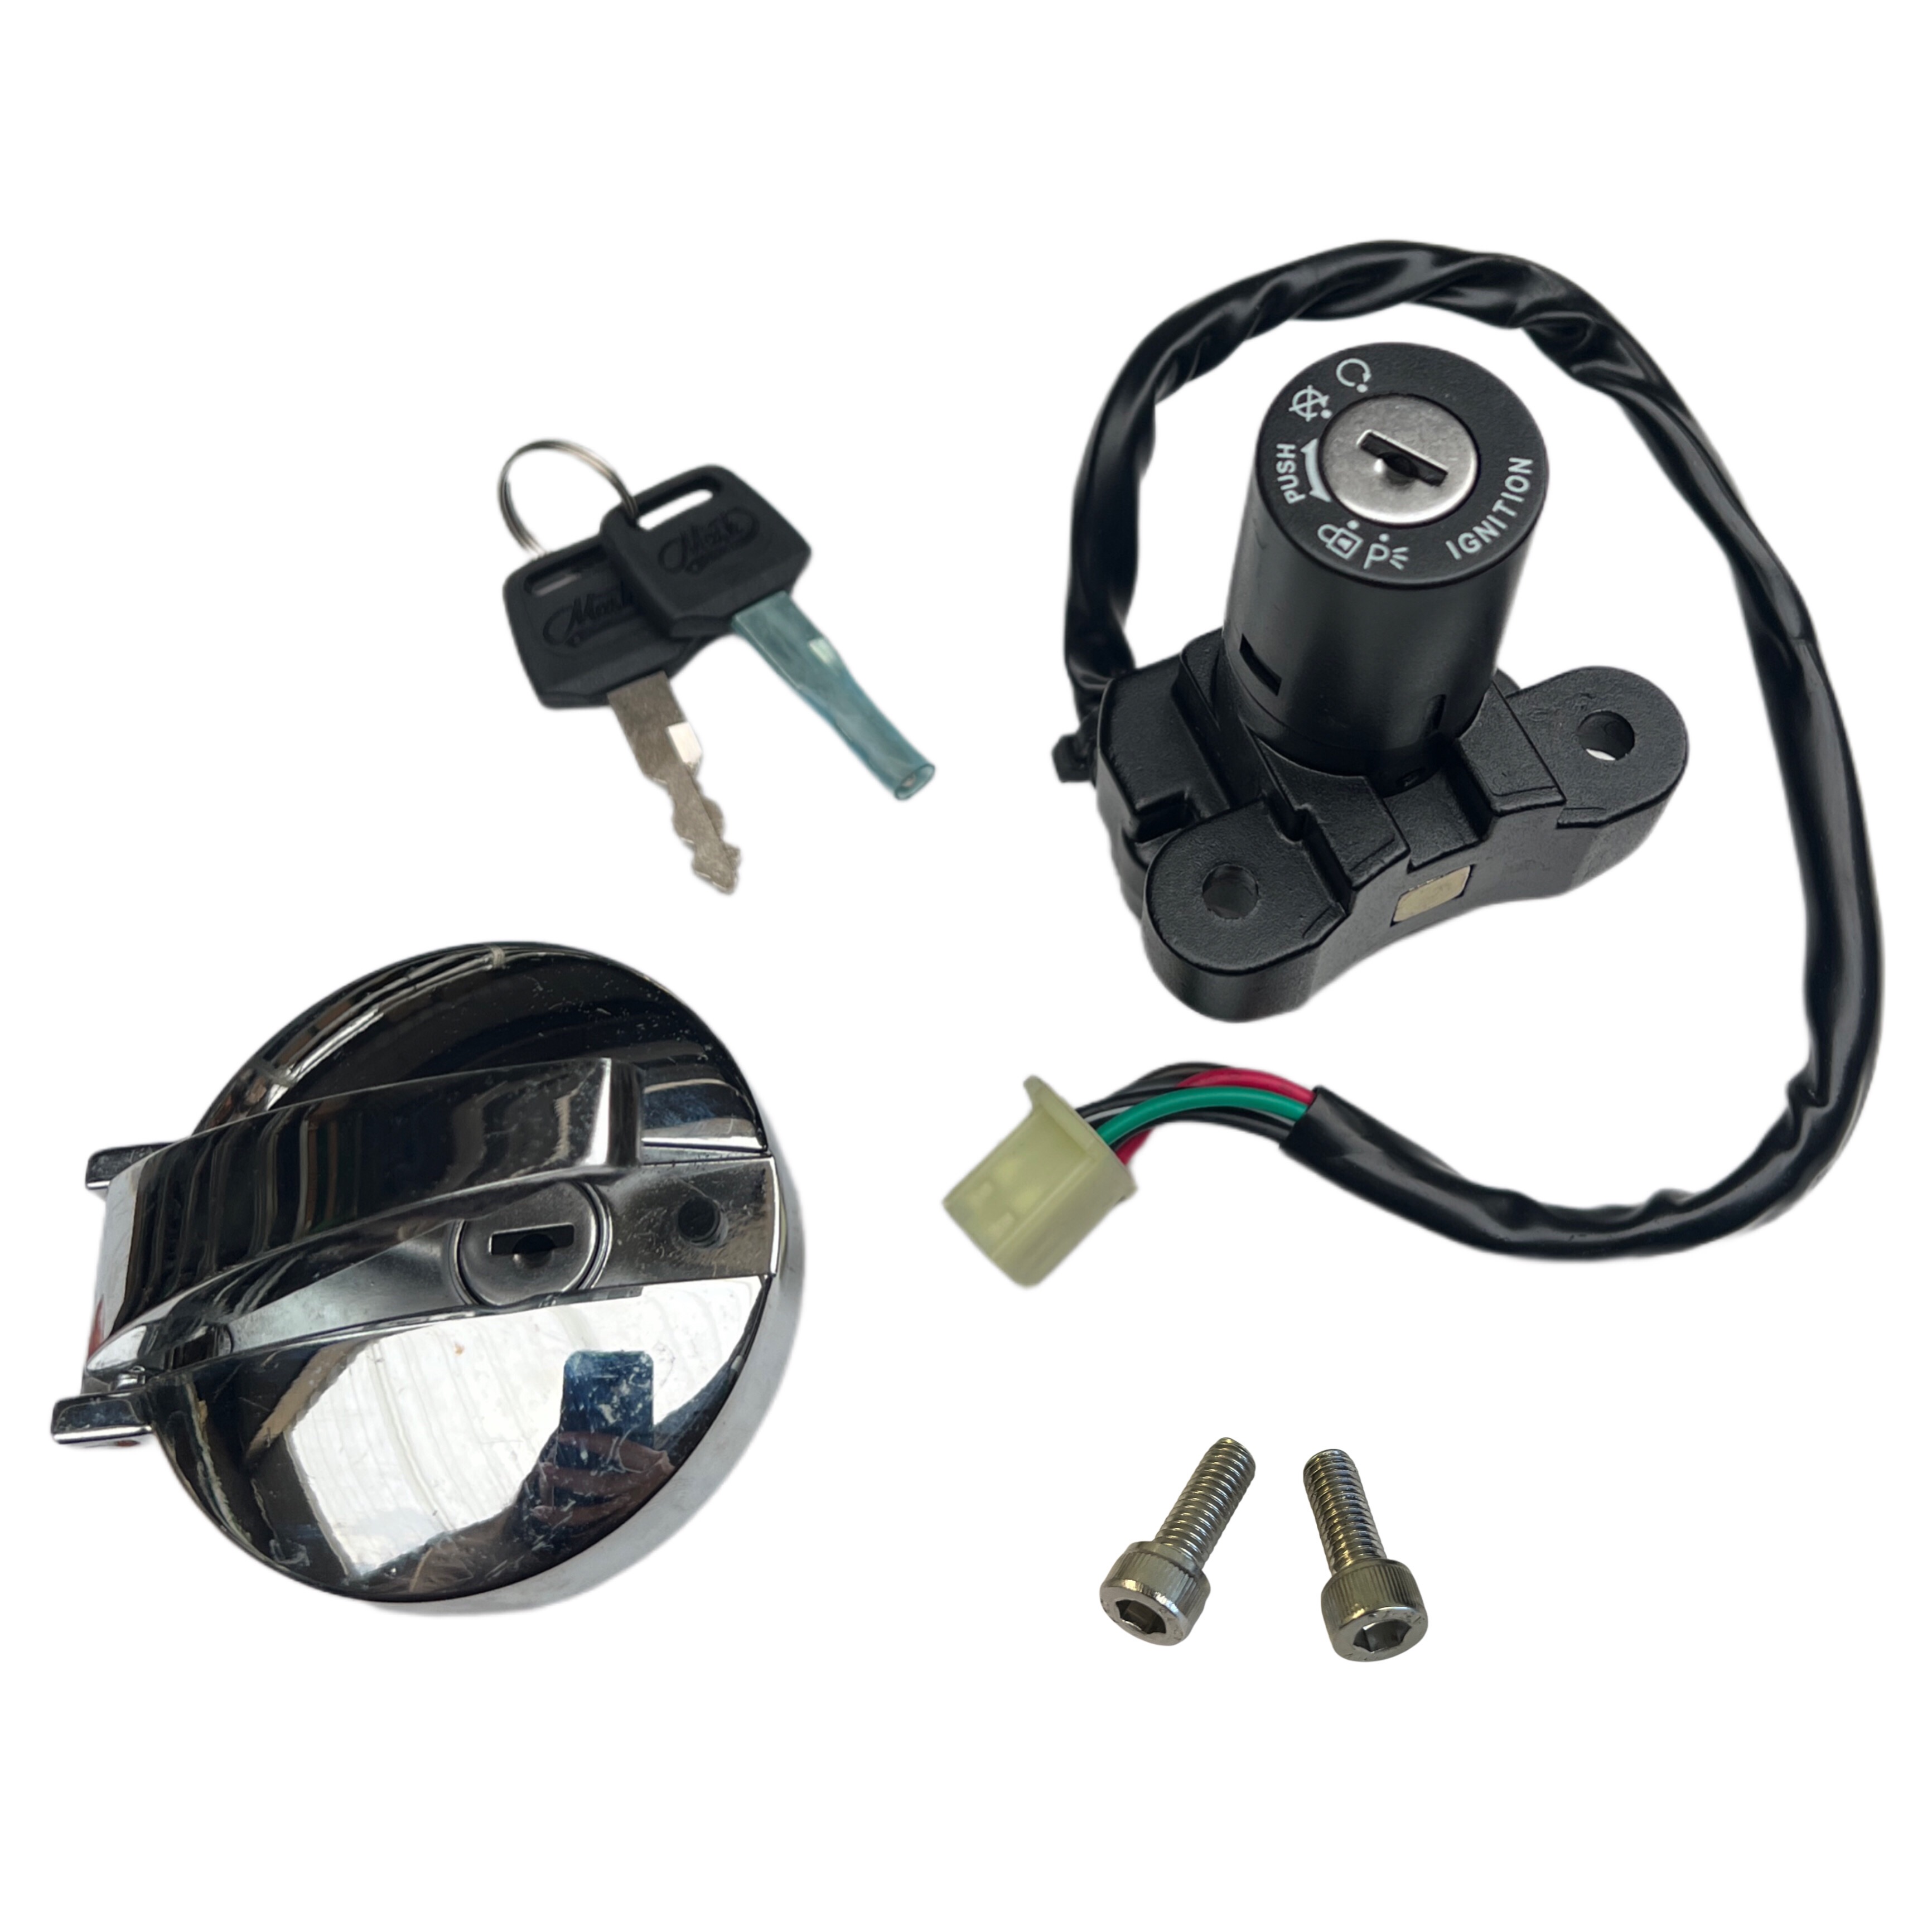 Ignition Switch and Fuel Cap Lock Set 